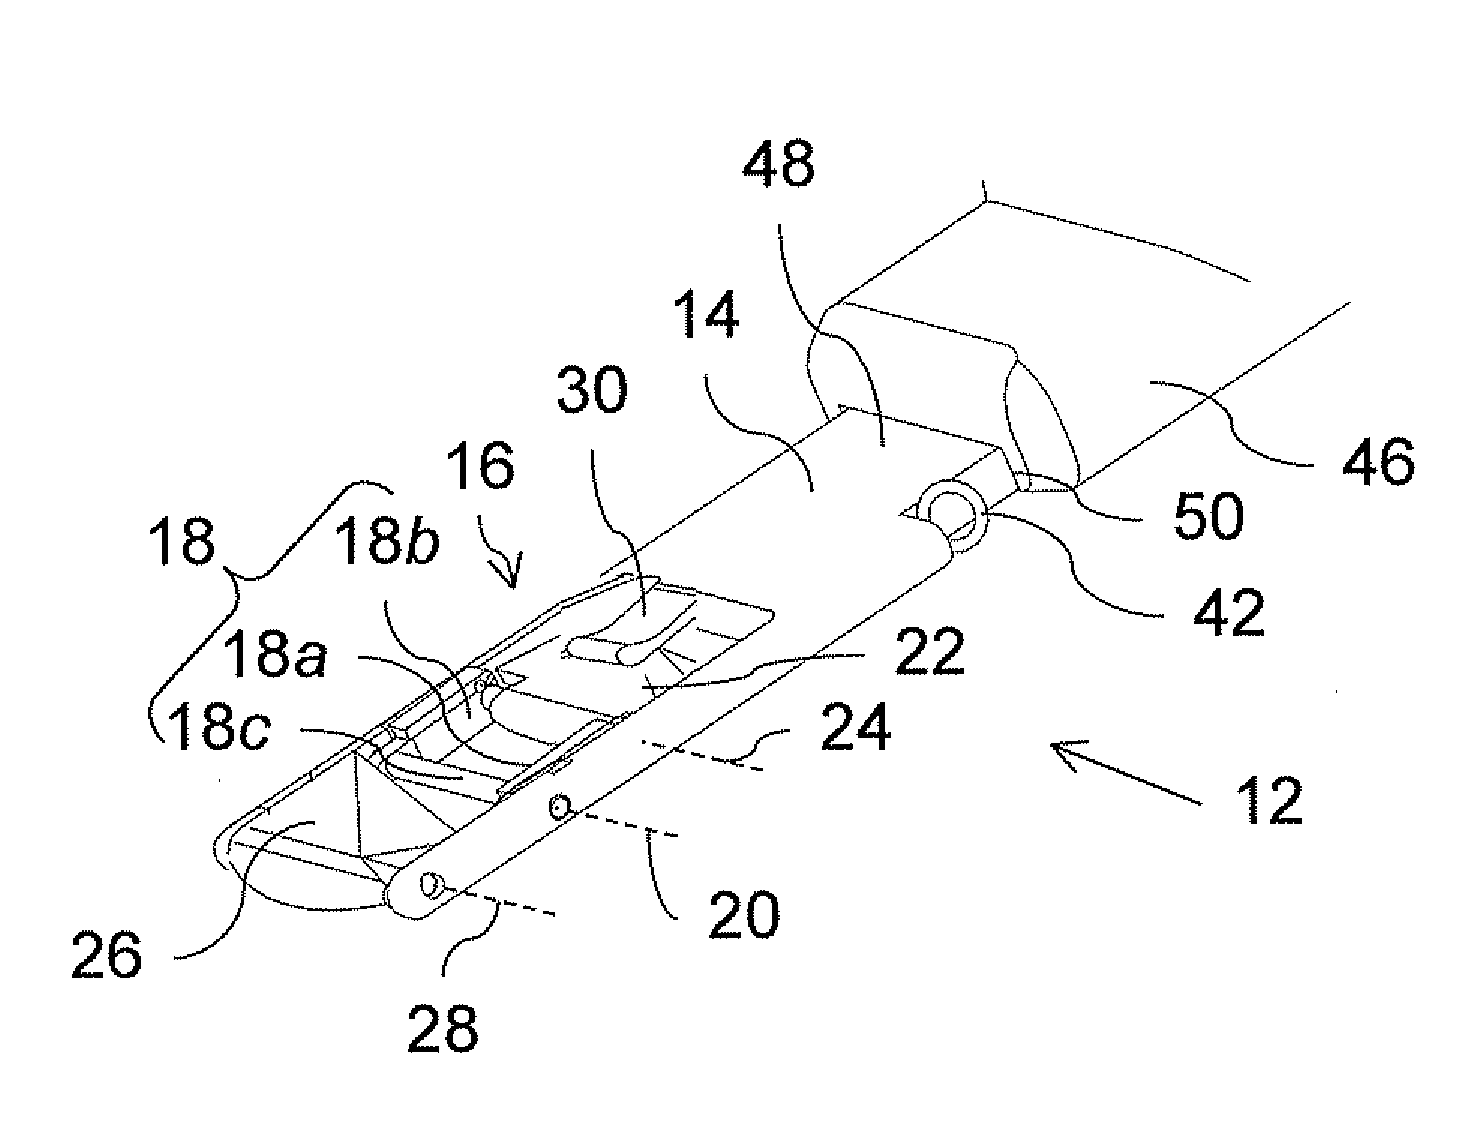 Surgical Tool For Removing A Block Of Tissue From An Organ